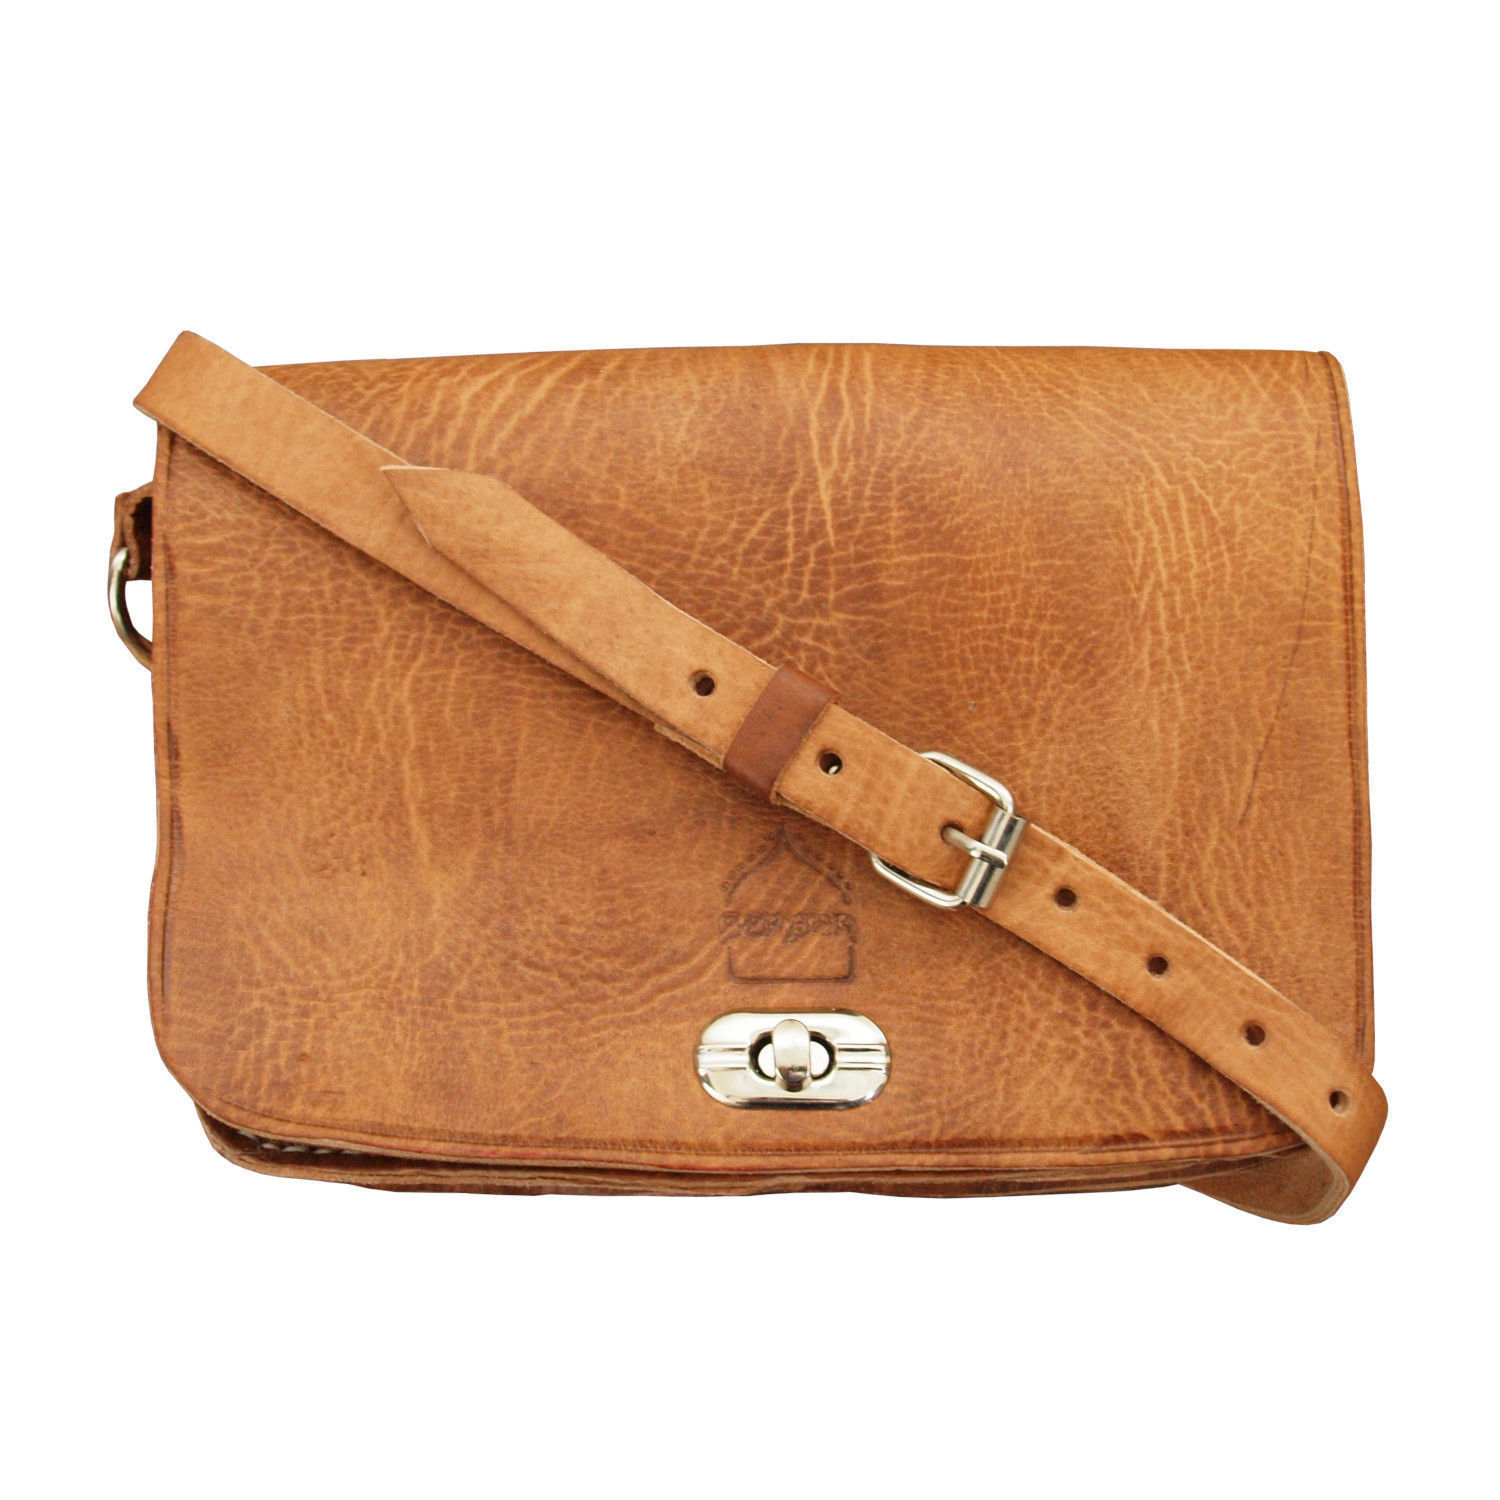 The Kenitra Cross-Body Bag in Tan with Strap on White Background